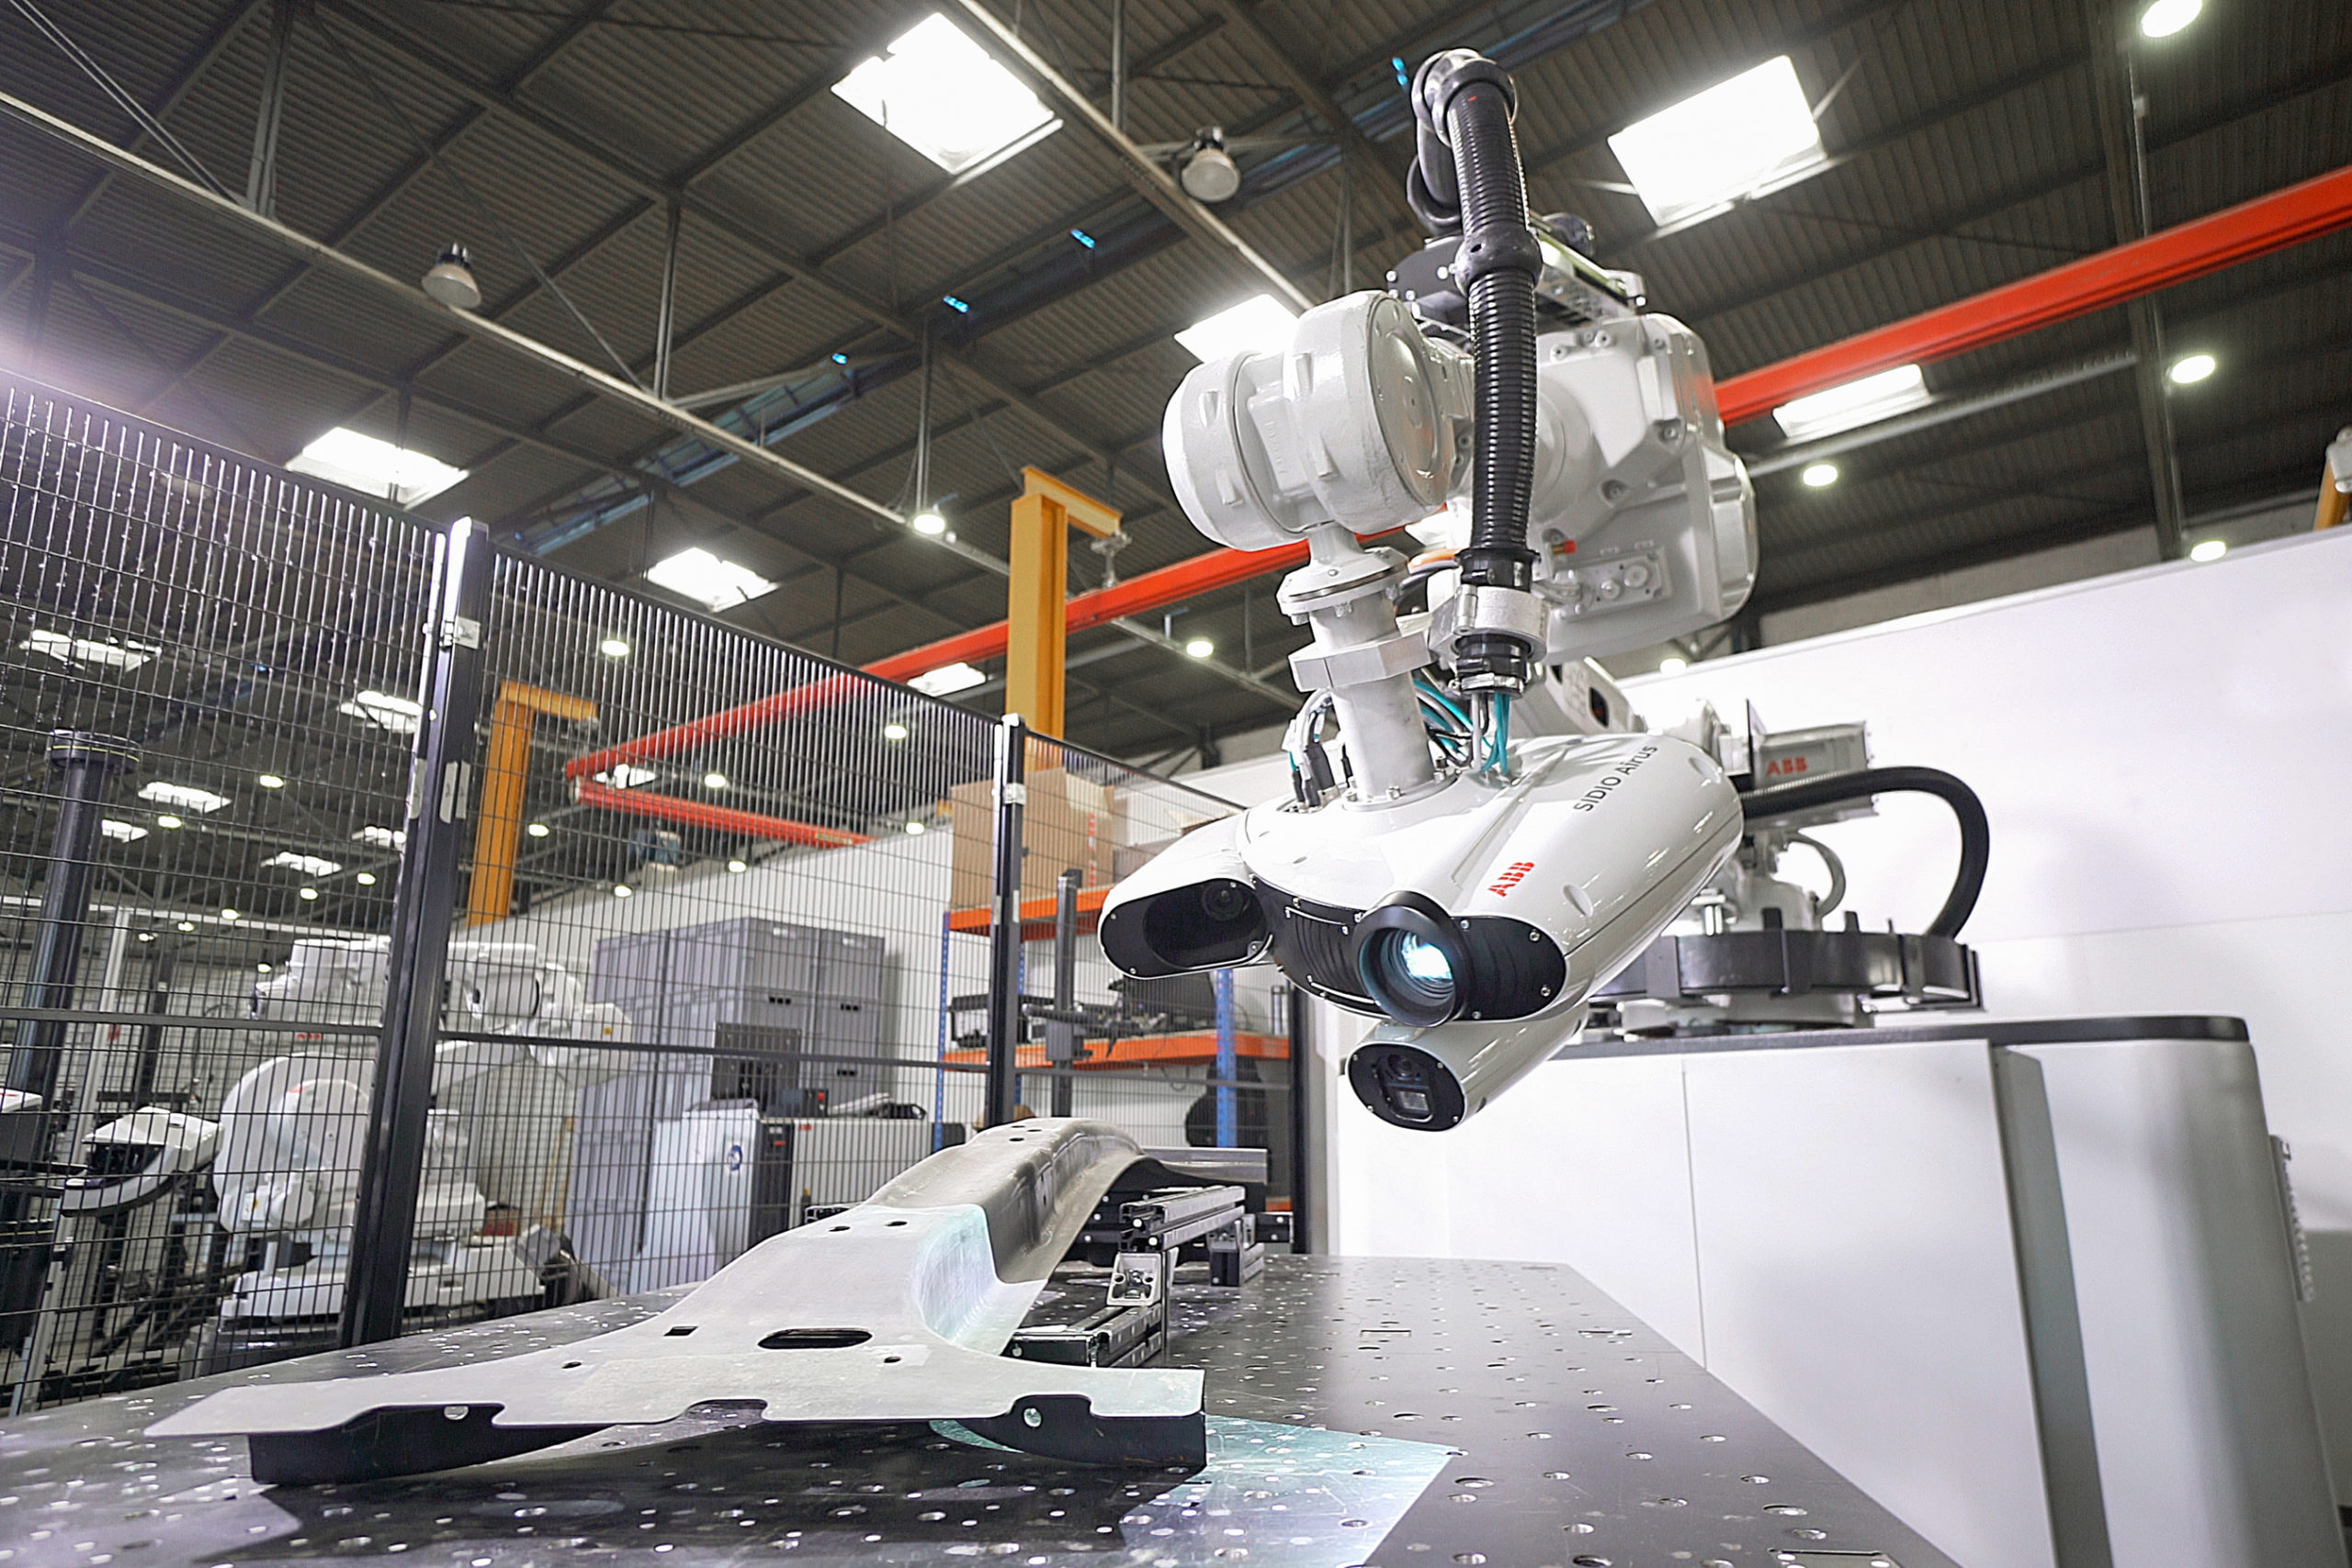 discrete manufacturing Quality control testing can get 10x faster with 3d robotic cell, says abb